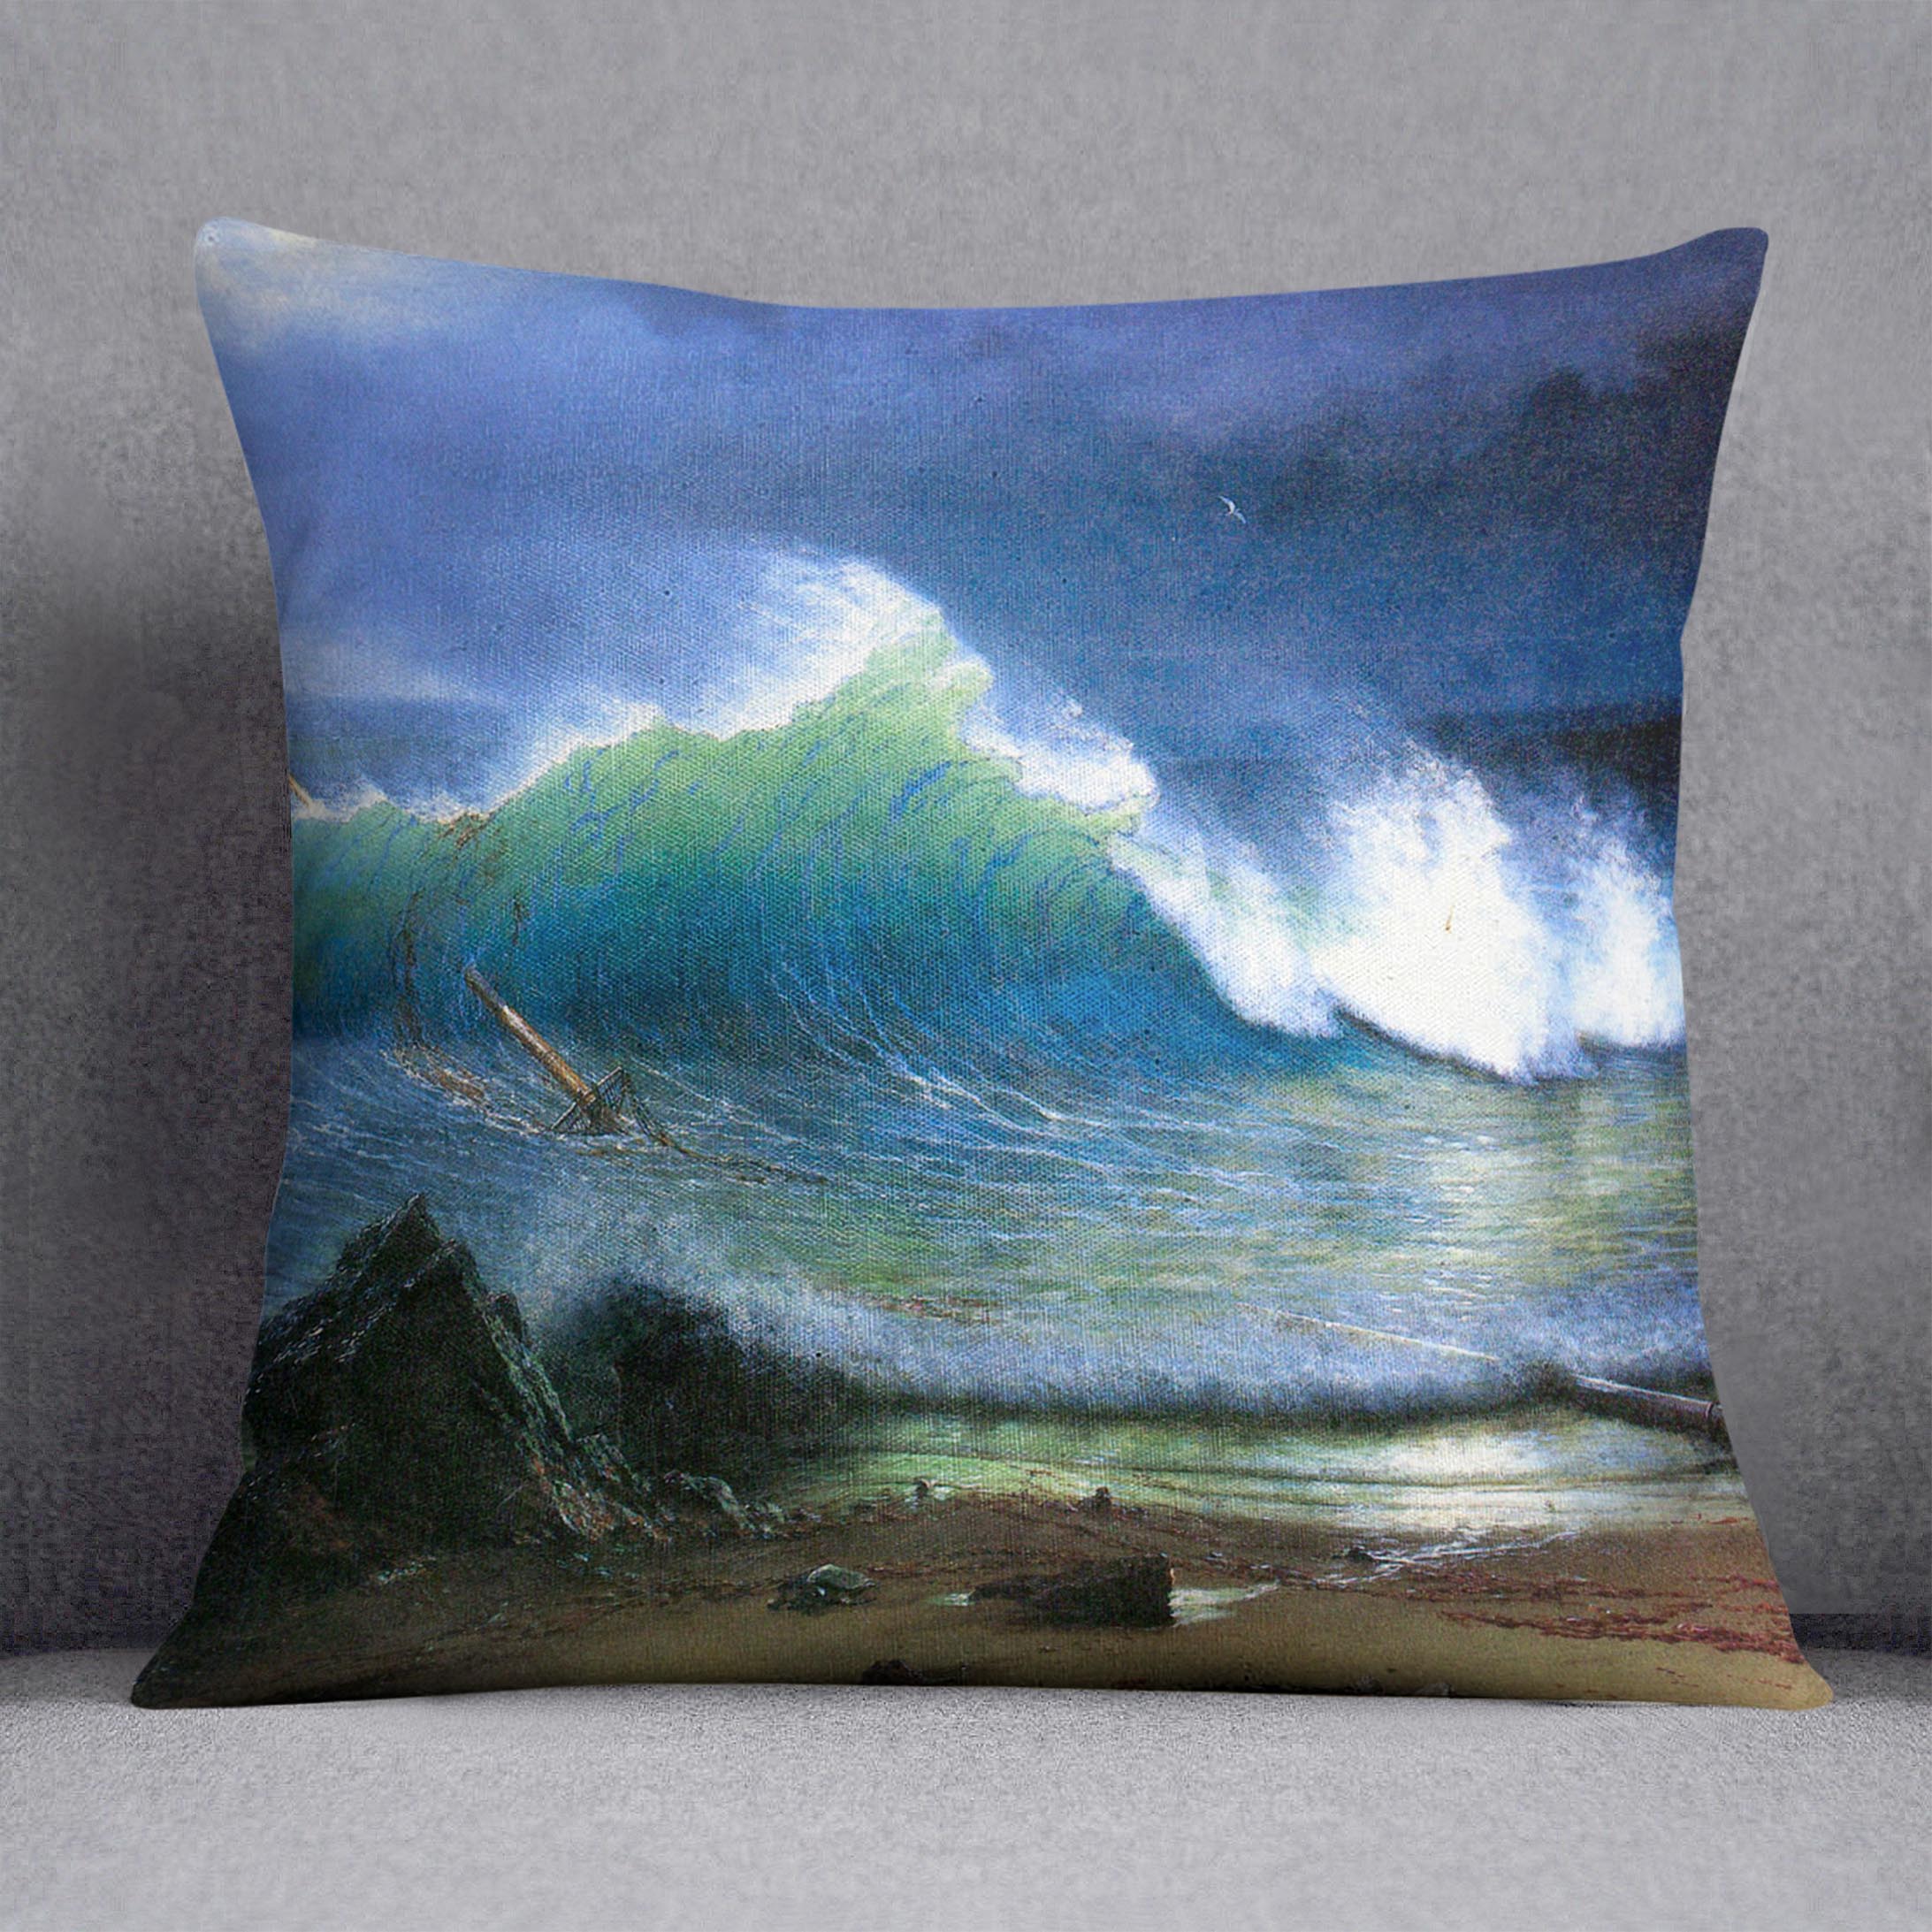 The coast of the Turquoise sea by Bierstadt Cushion - Canvas Art Rocks - 1